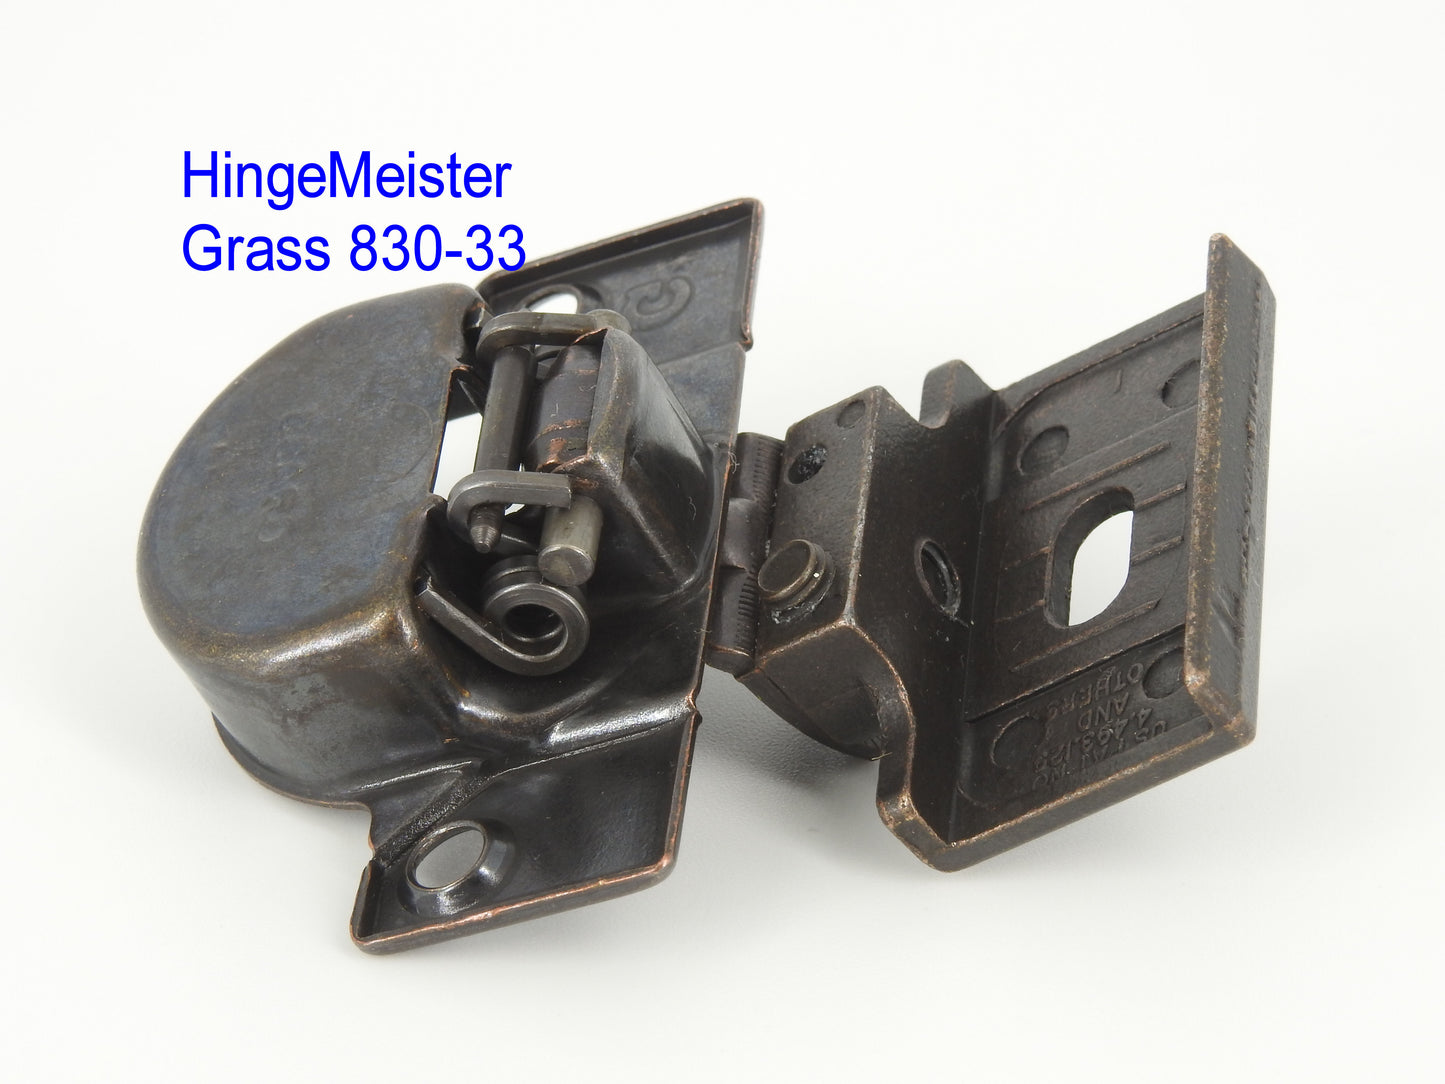 Grass 850 / 830-33 Bronze Hinge and mounting plate - Complete Hinge - Refurbished